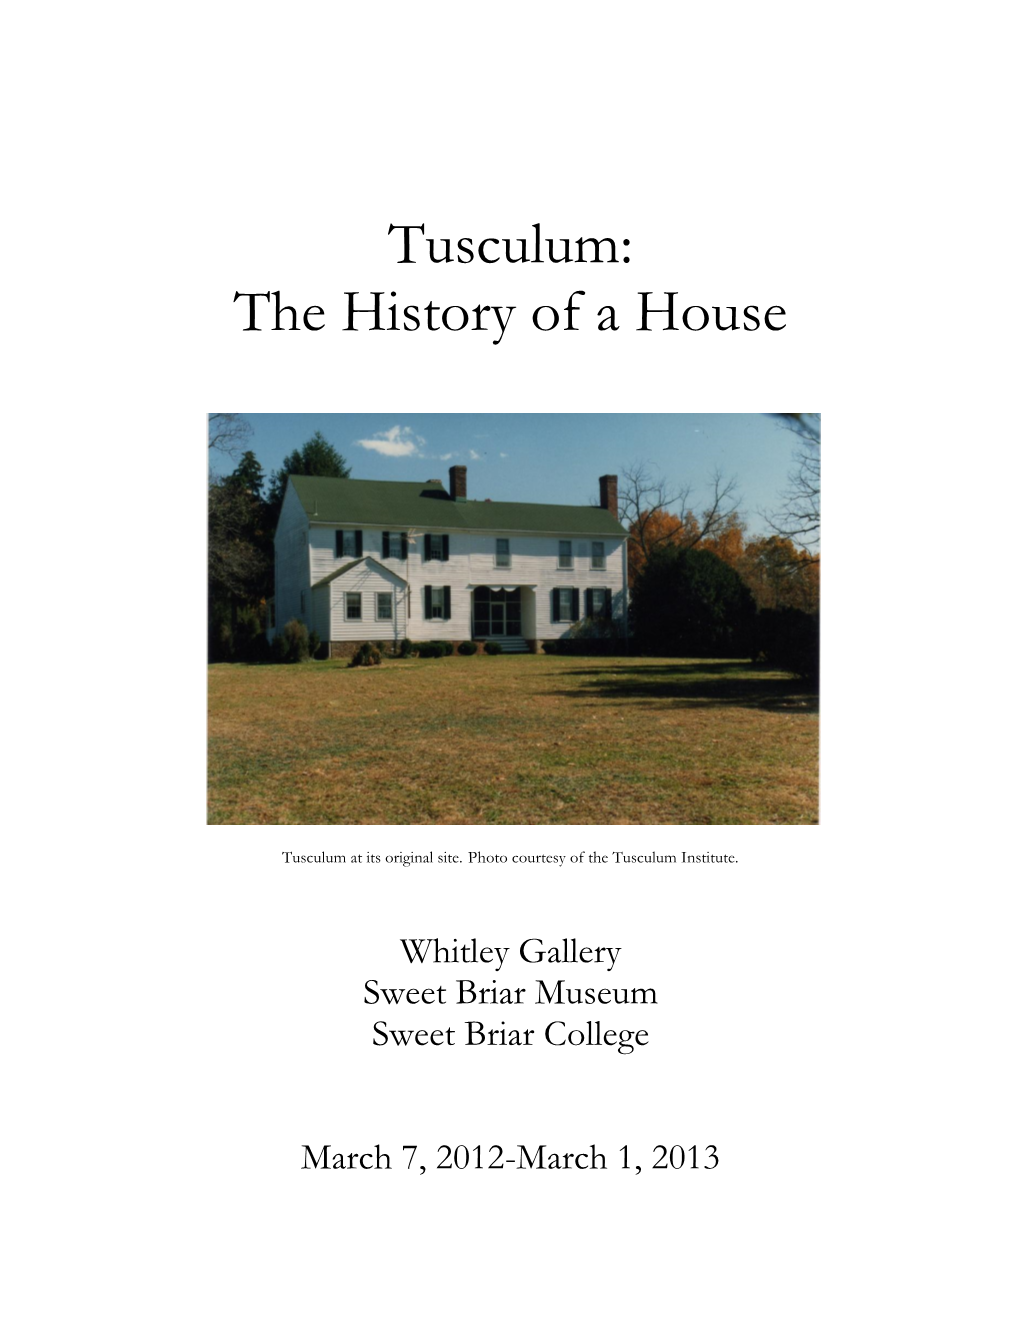 Tusculum: the History of a House